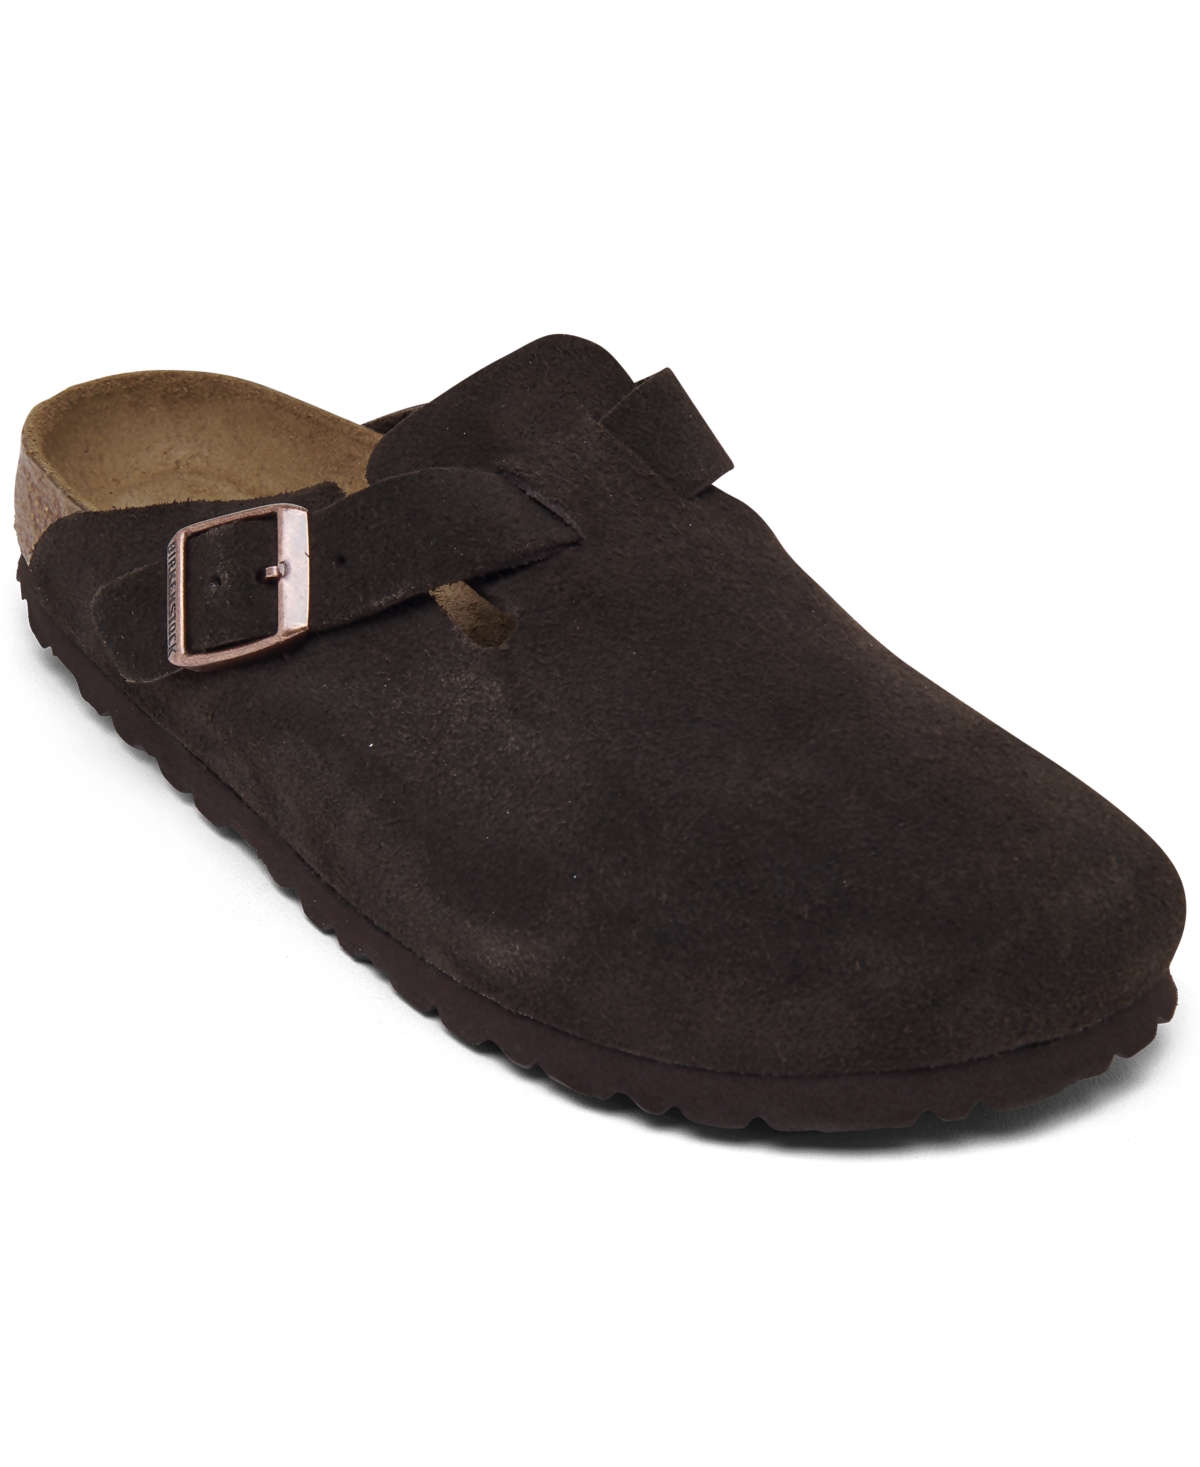 Shop Birkenstock Women's Boston Soft Footbed Suede Leather Clogs From Finish Line In Mocha